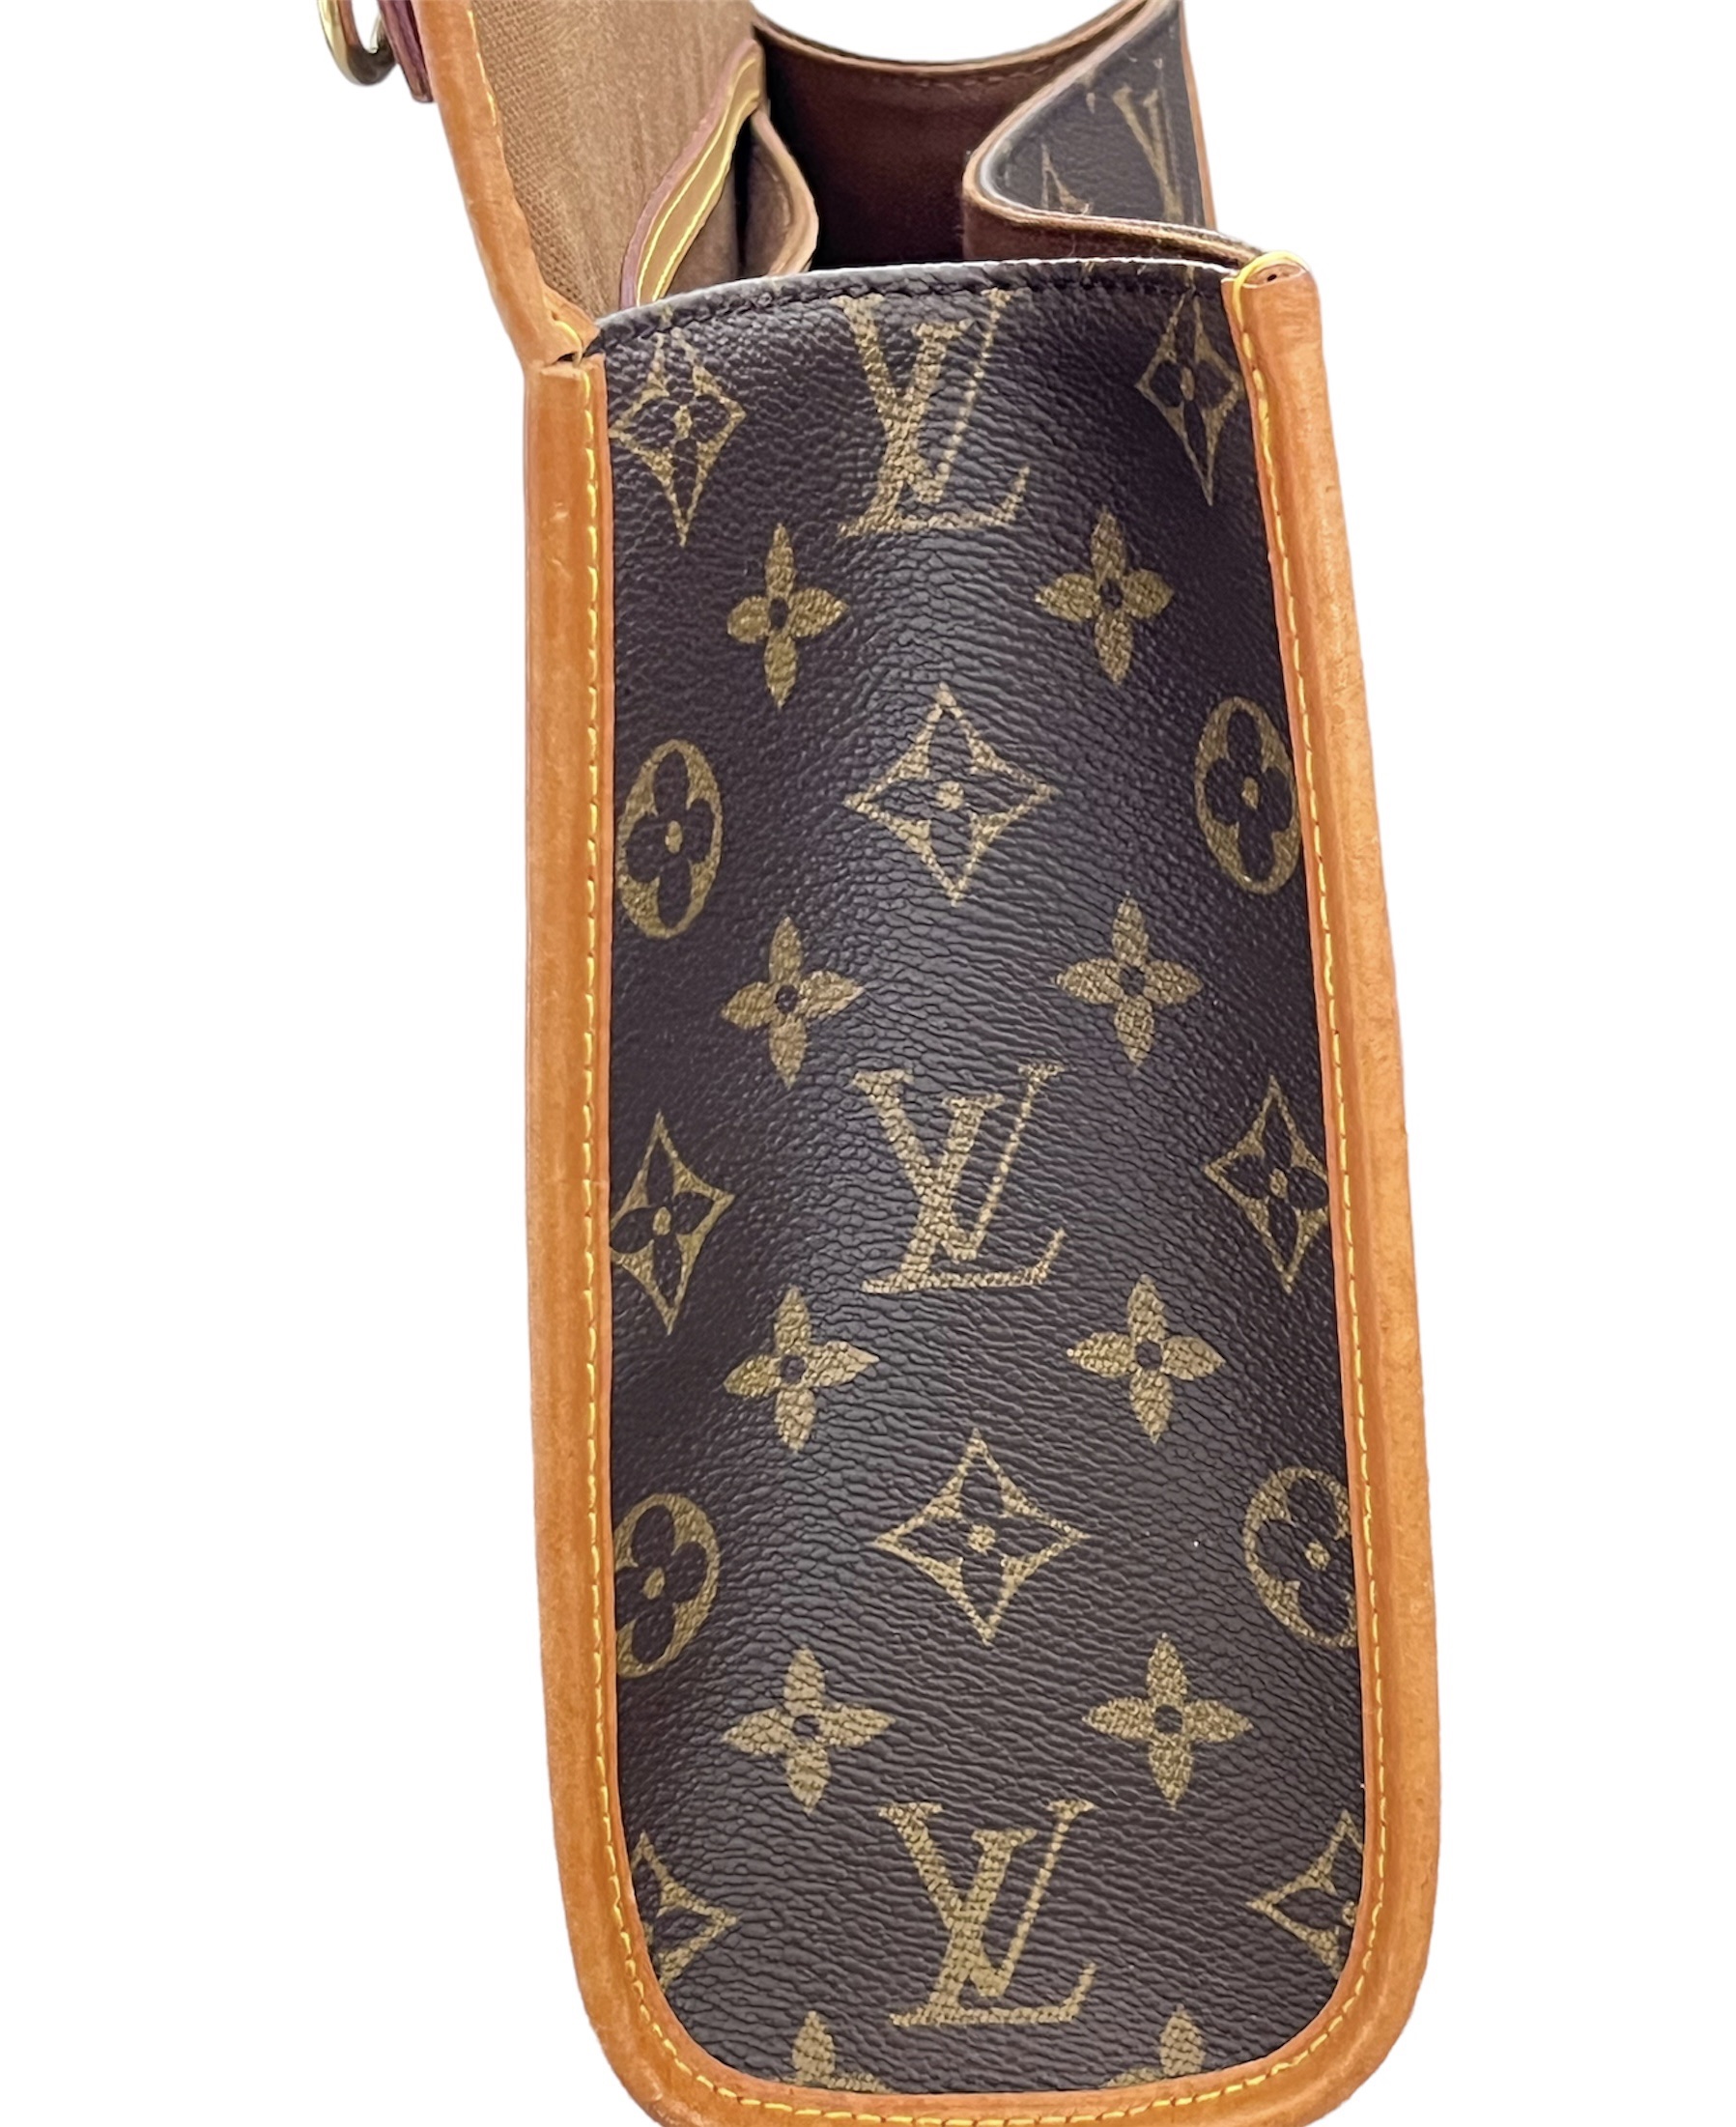 Louis Vuitton Monogram Bel Air M10090!!! WITH Strap - $669 - From